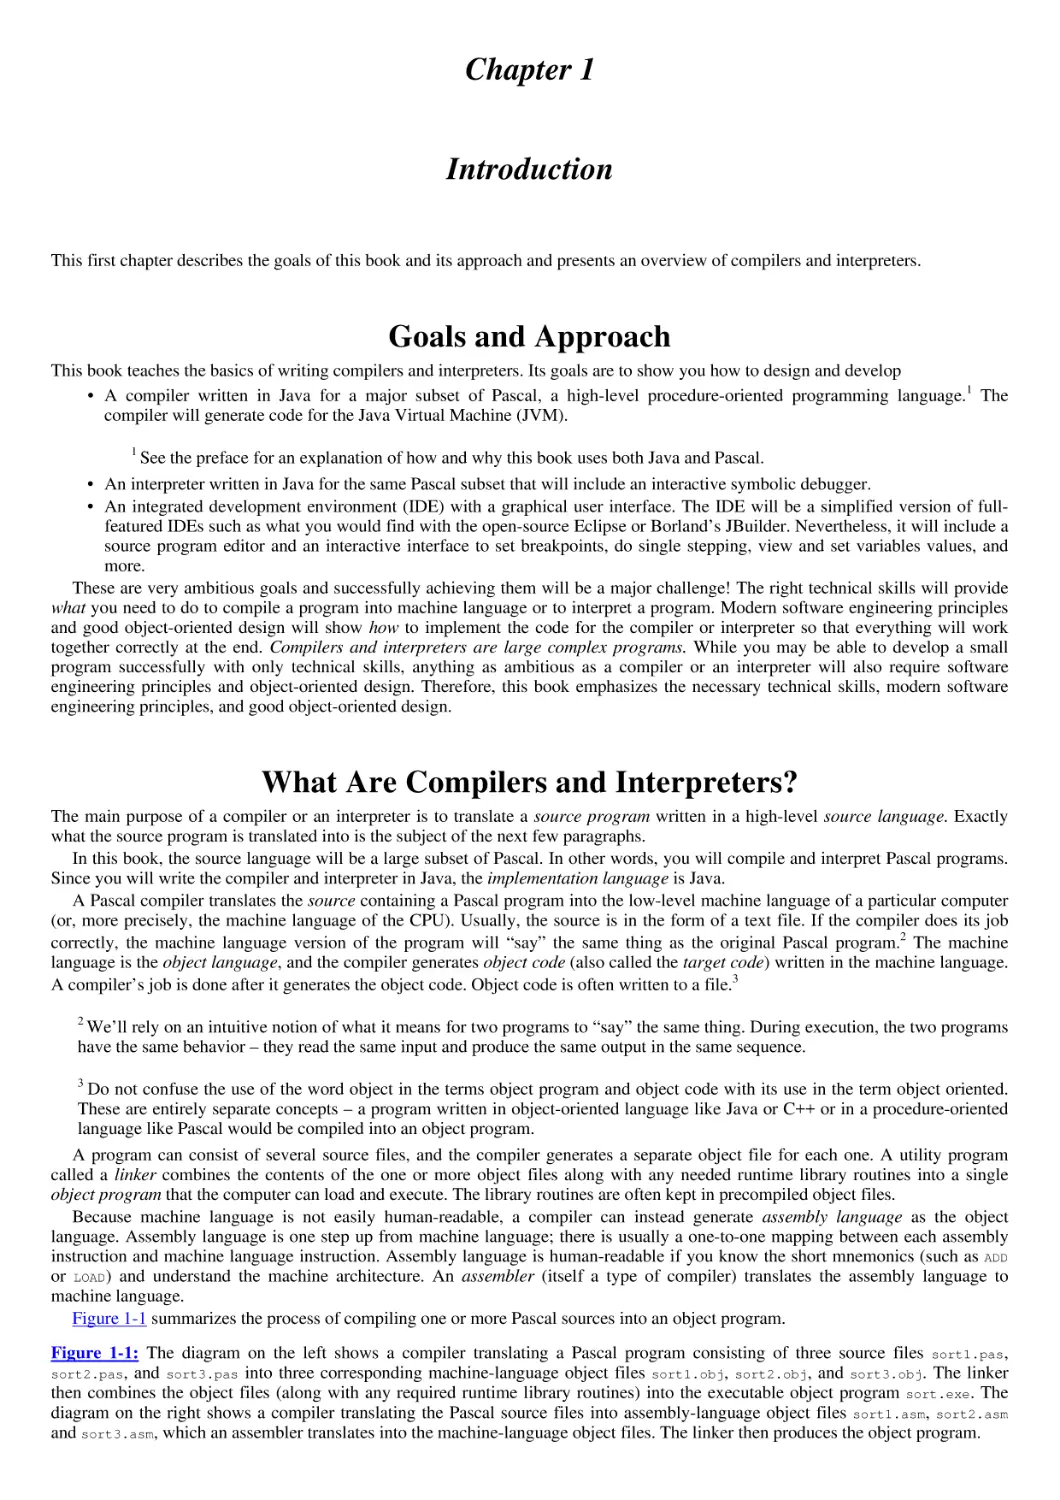 Chapter 1
Goals and Approach
What Are Compilers and Interpreters?